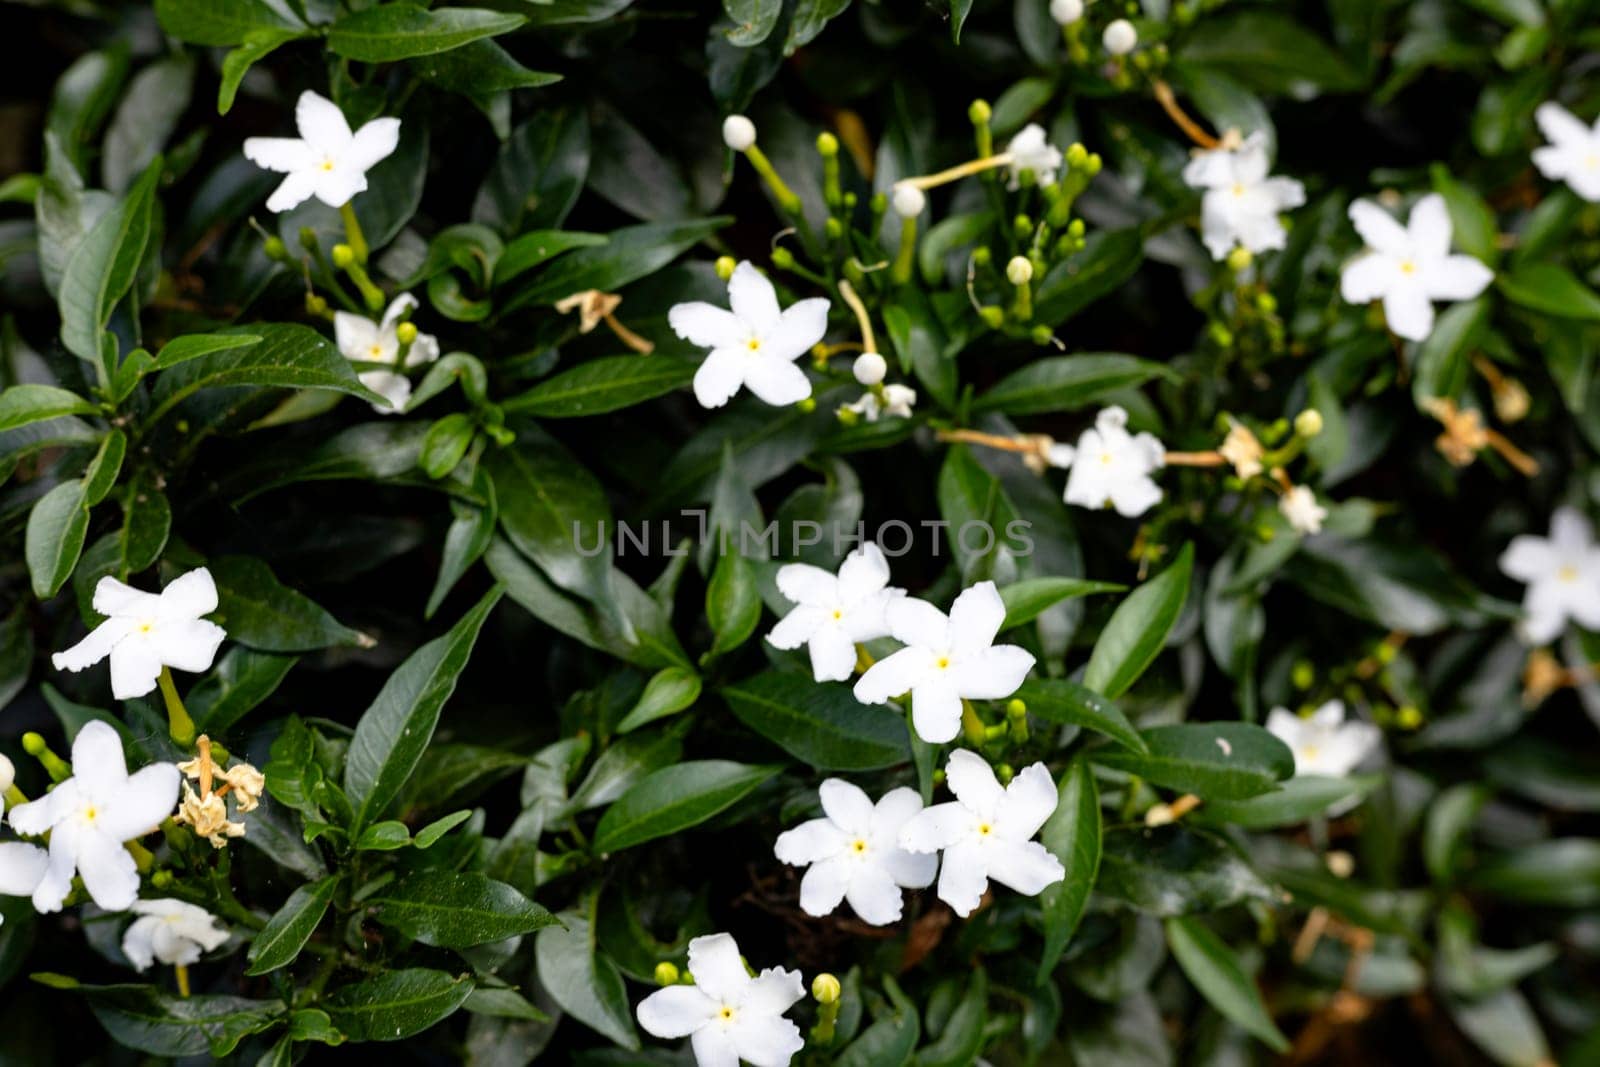 Plants with white flowers and green leaves grow abundantly. Close-up of beautiful white flowers and green leaves.